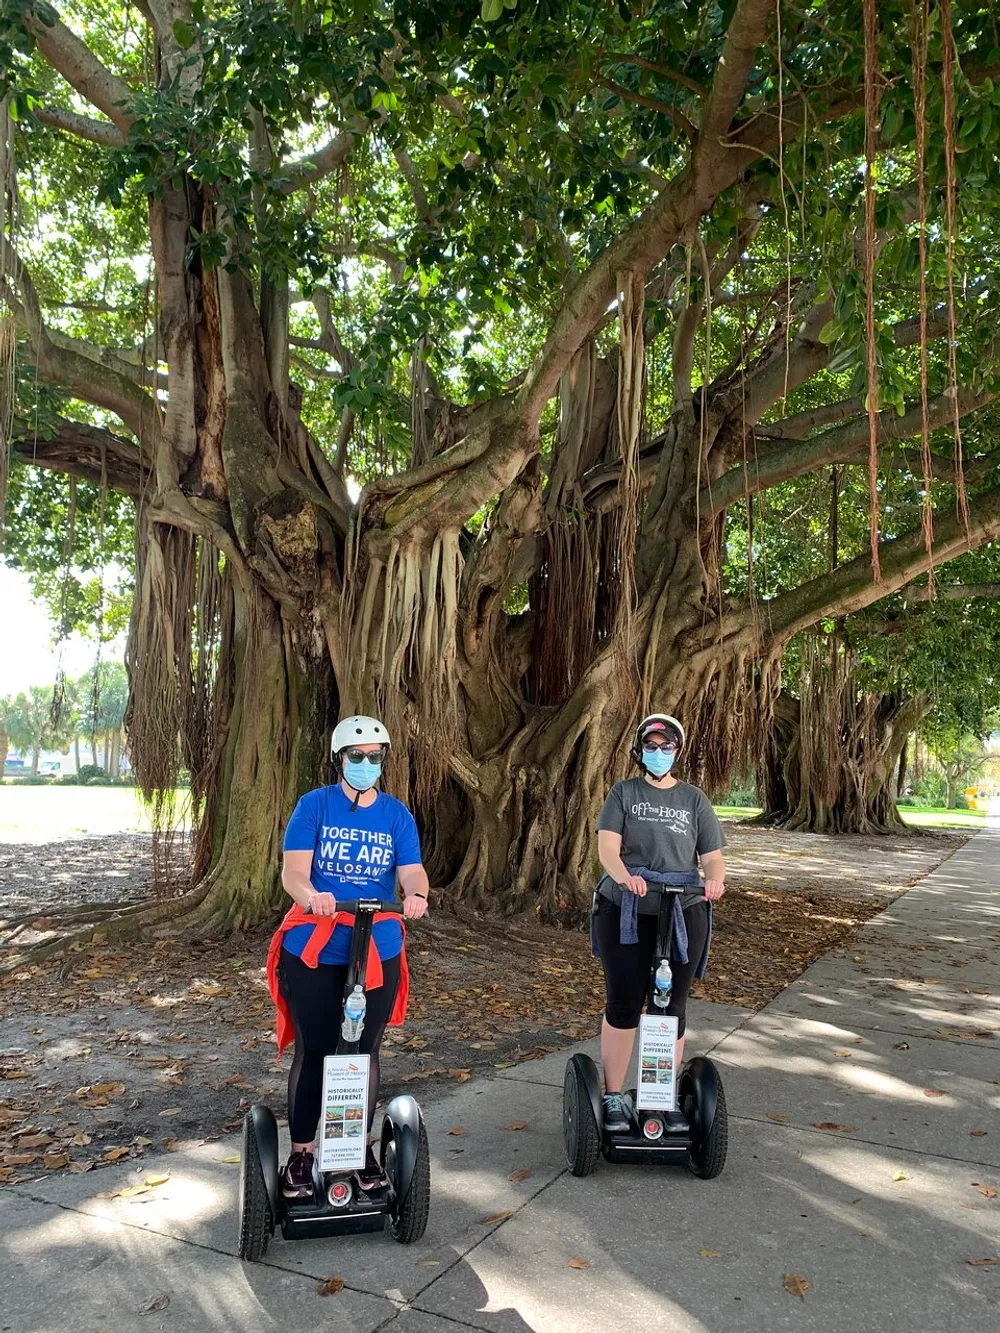 Two people wearing helmets are standing on Segways under the sprawling branches of a banyan tree